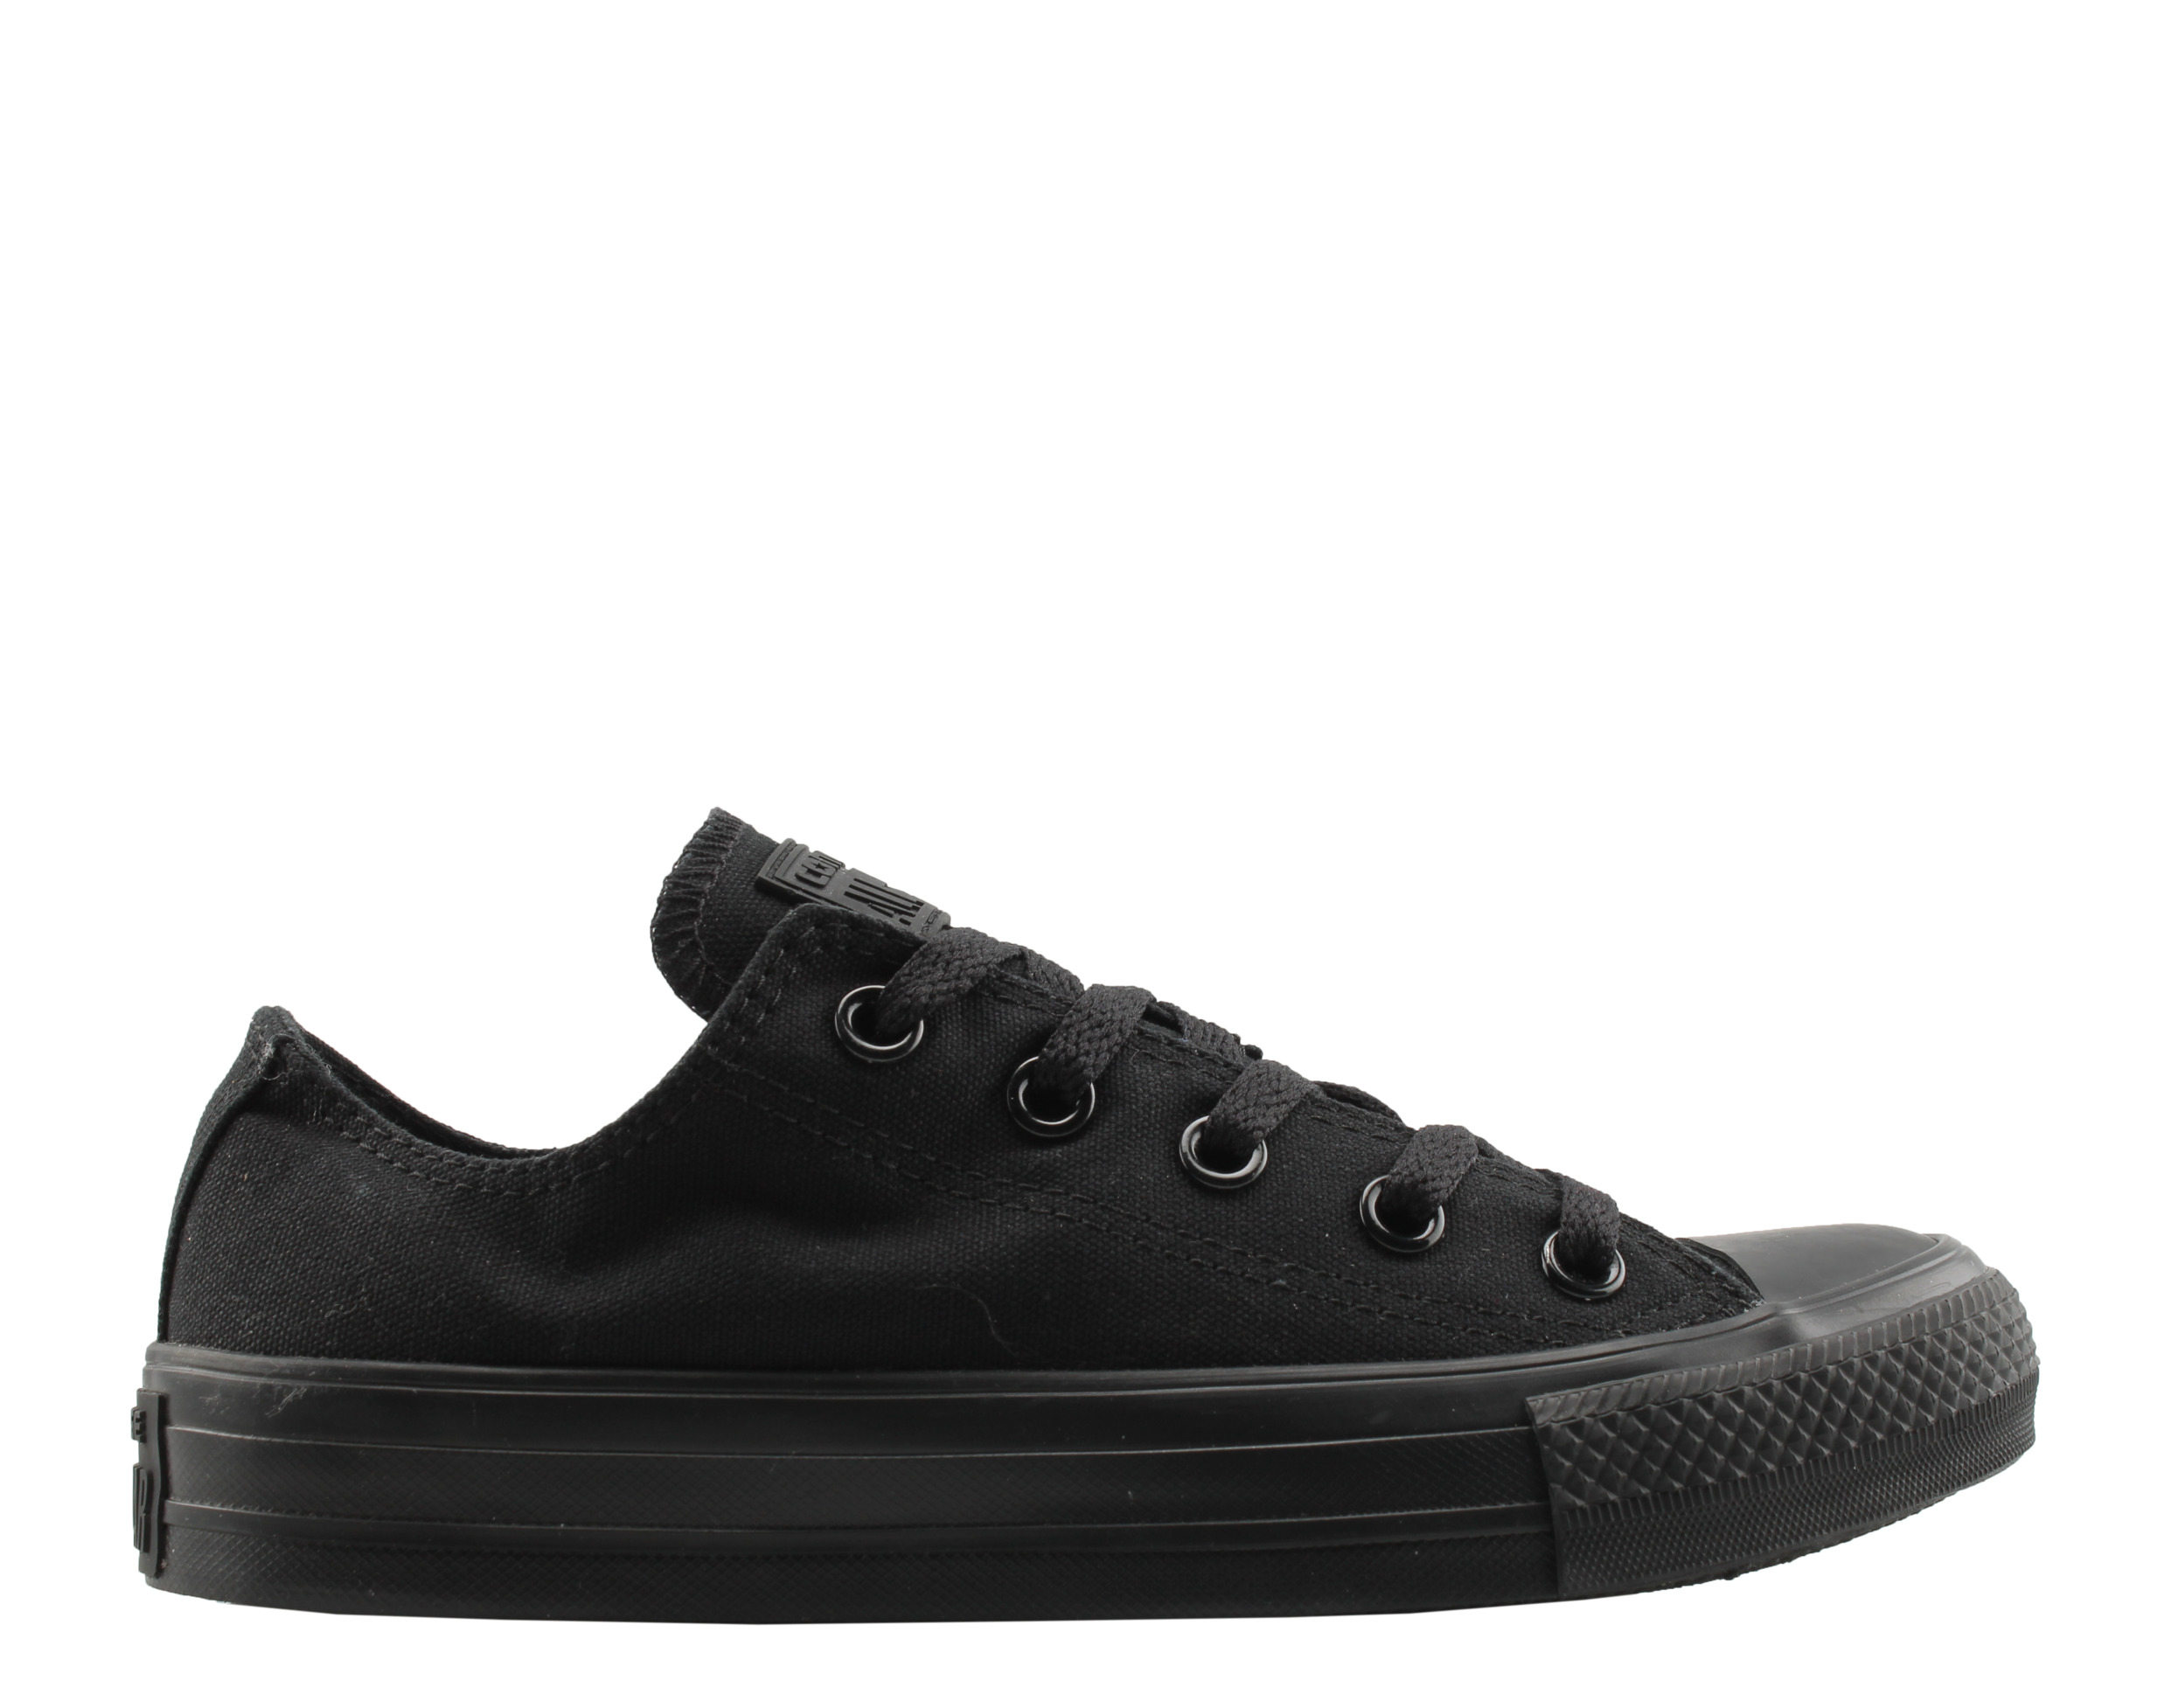 Converse Unisex Chuck Taylor All Star Low Top - image 2 of 6